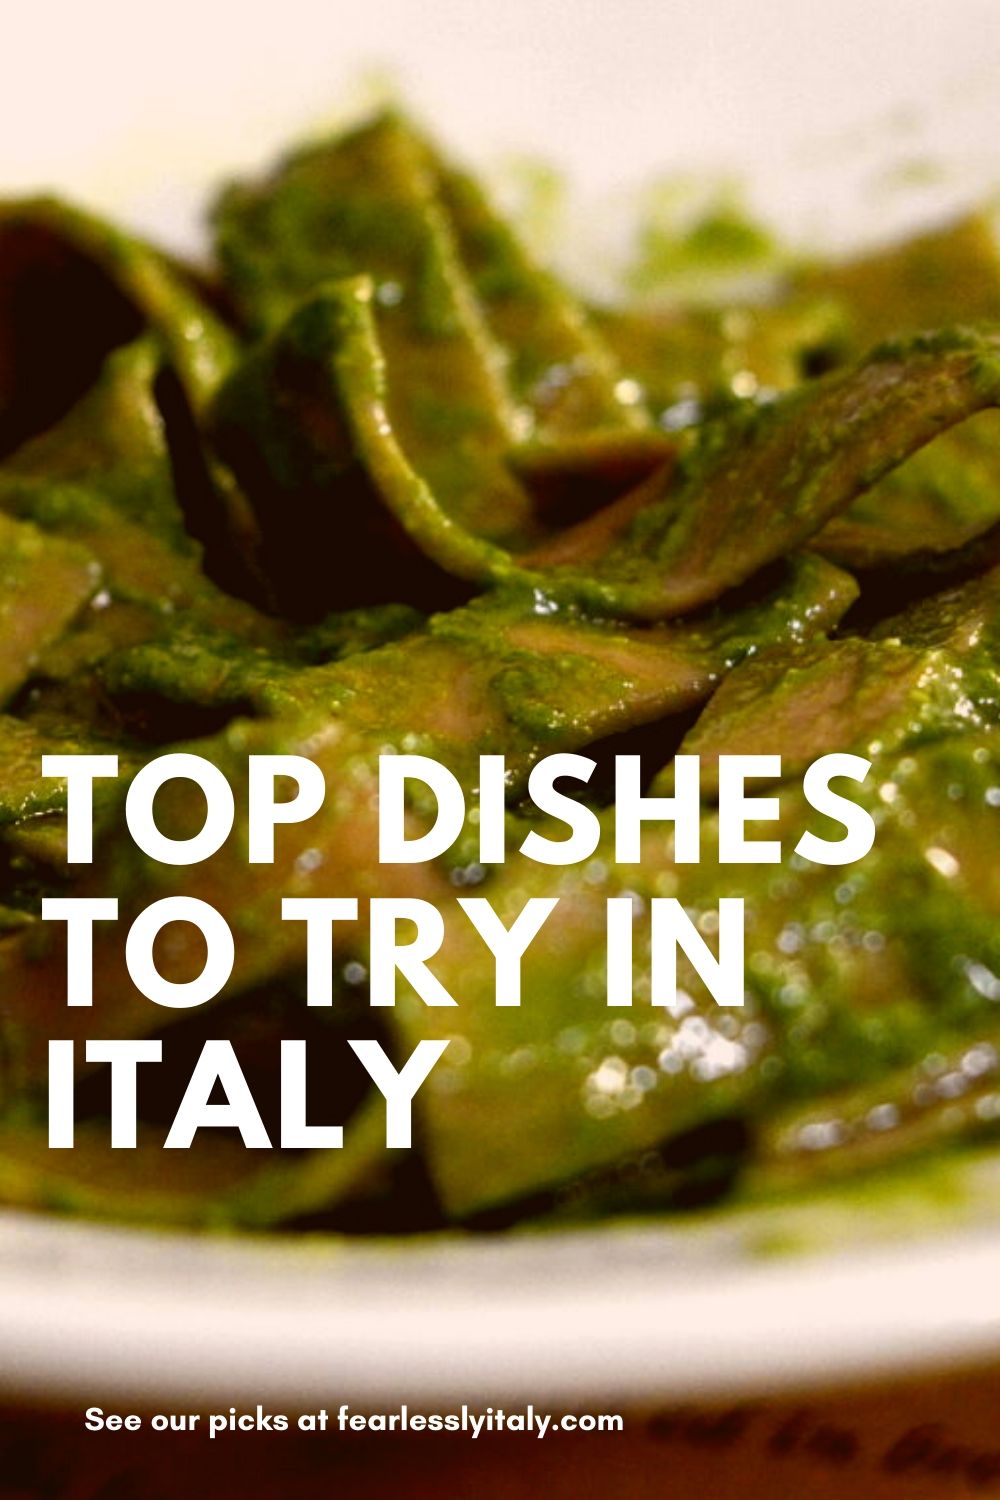 Pinterest image: Image of tagliatelle al pesto Italian dish with overlay caption reading "Top dishes to tray in Italy"